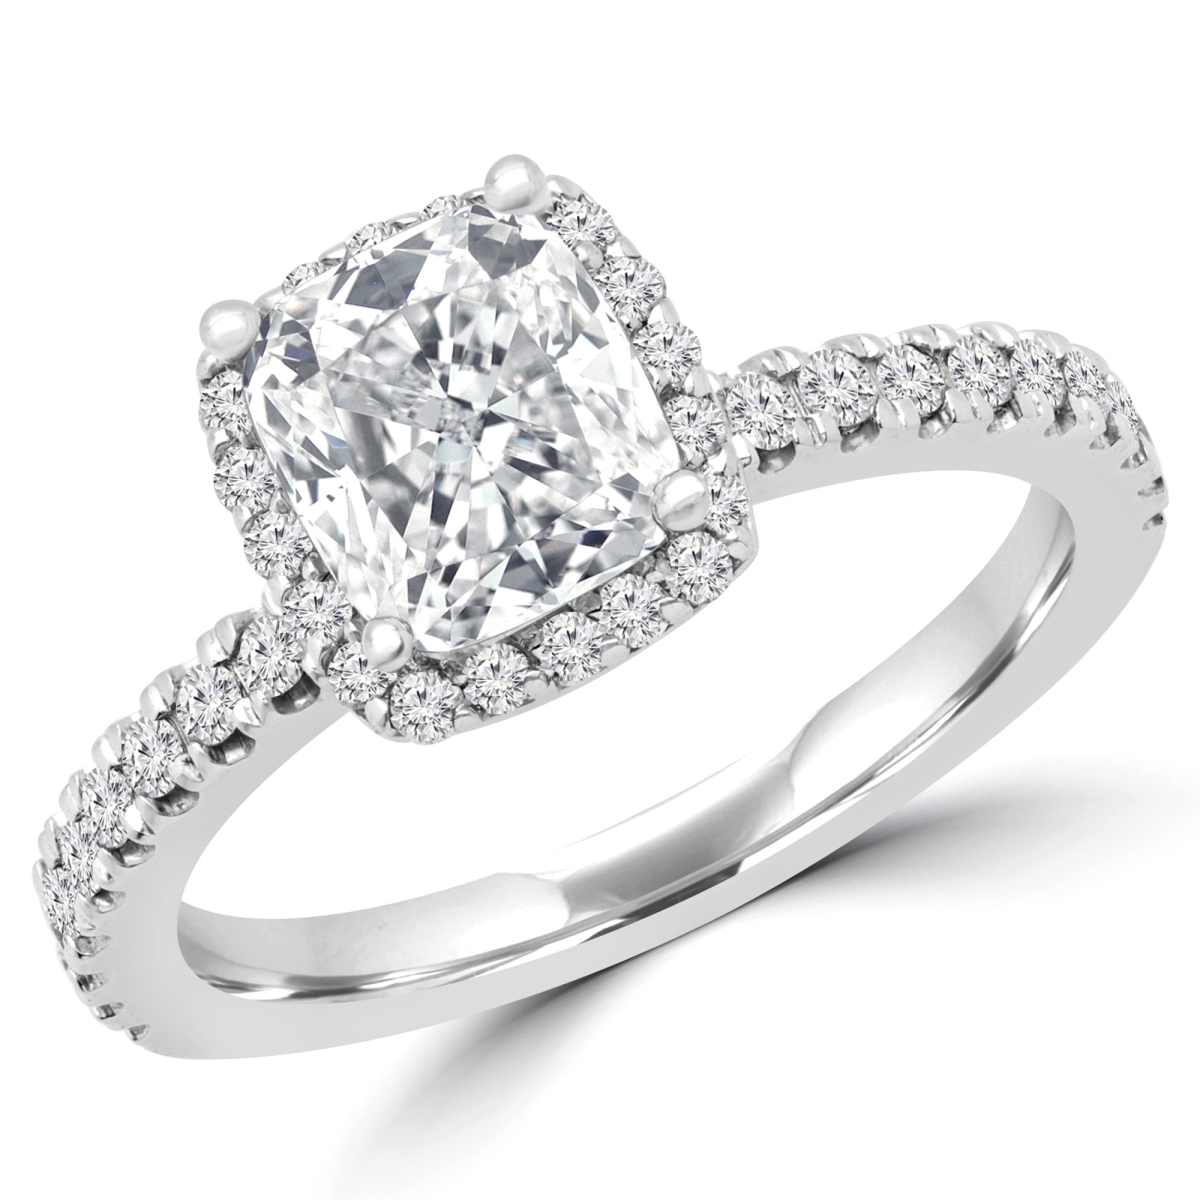 Picture of Majesty Diamonds MD180488-P 1.6 CTW Cushion Diamond Halo Engagement Ring in 14K White Gold